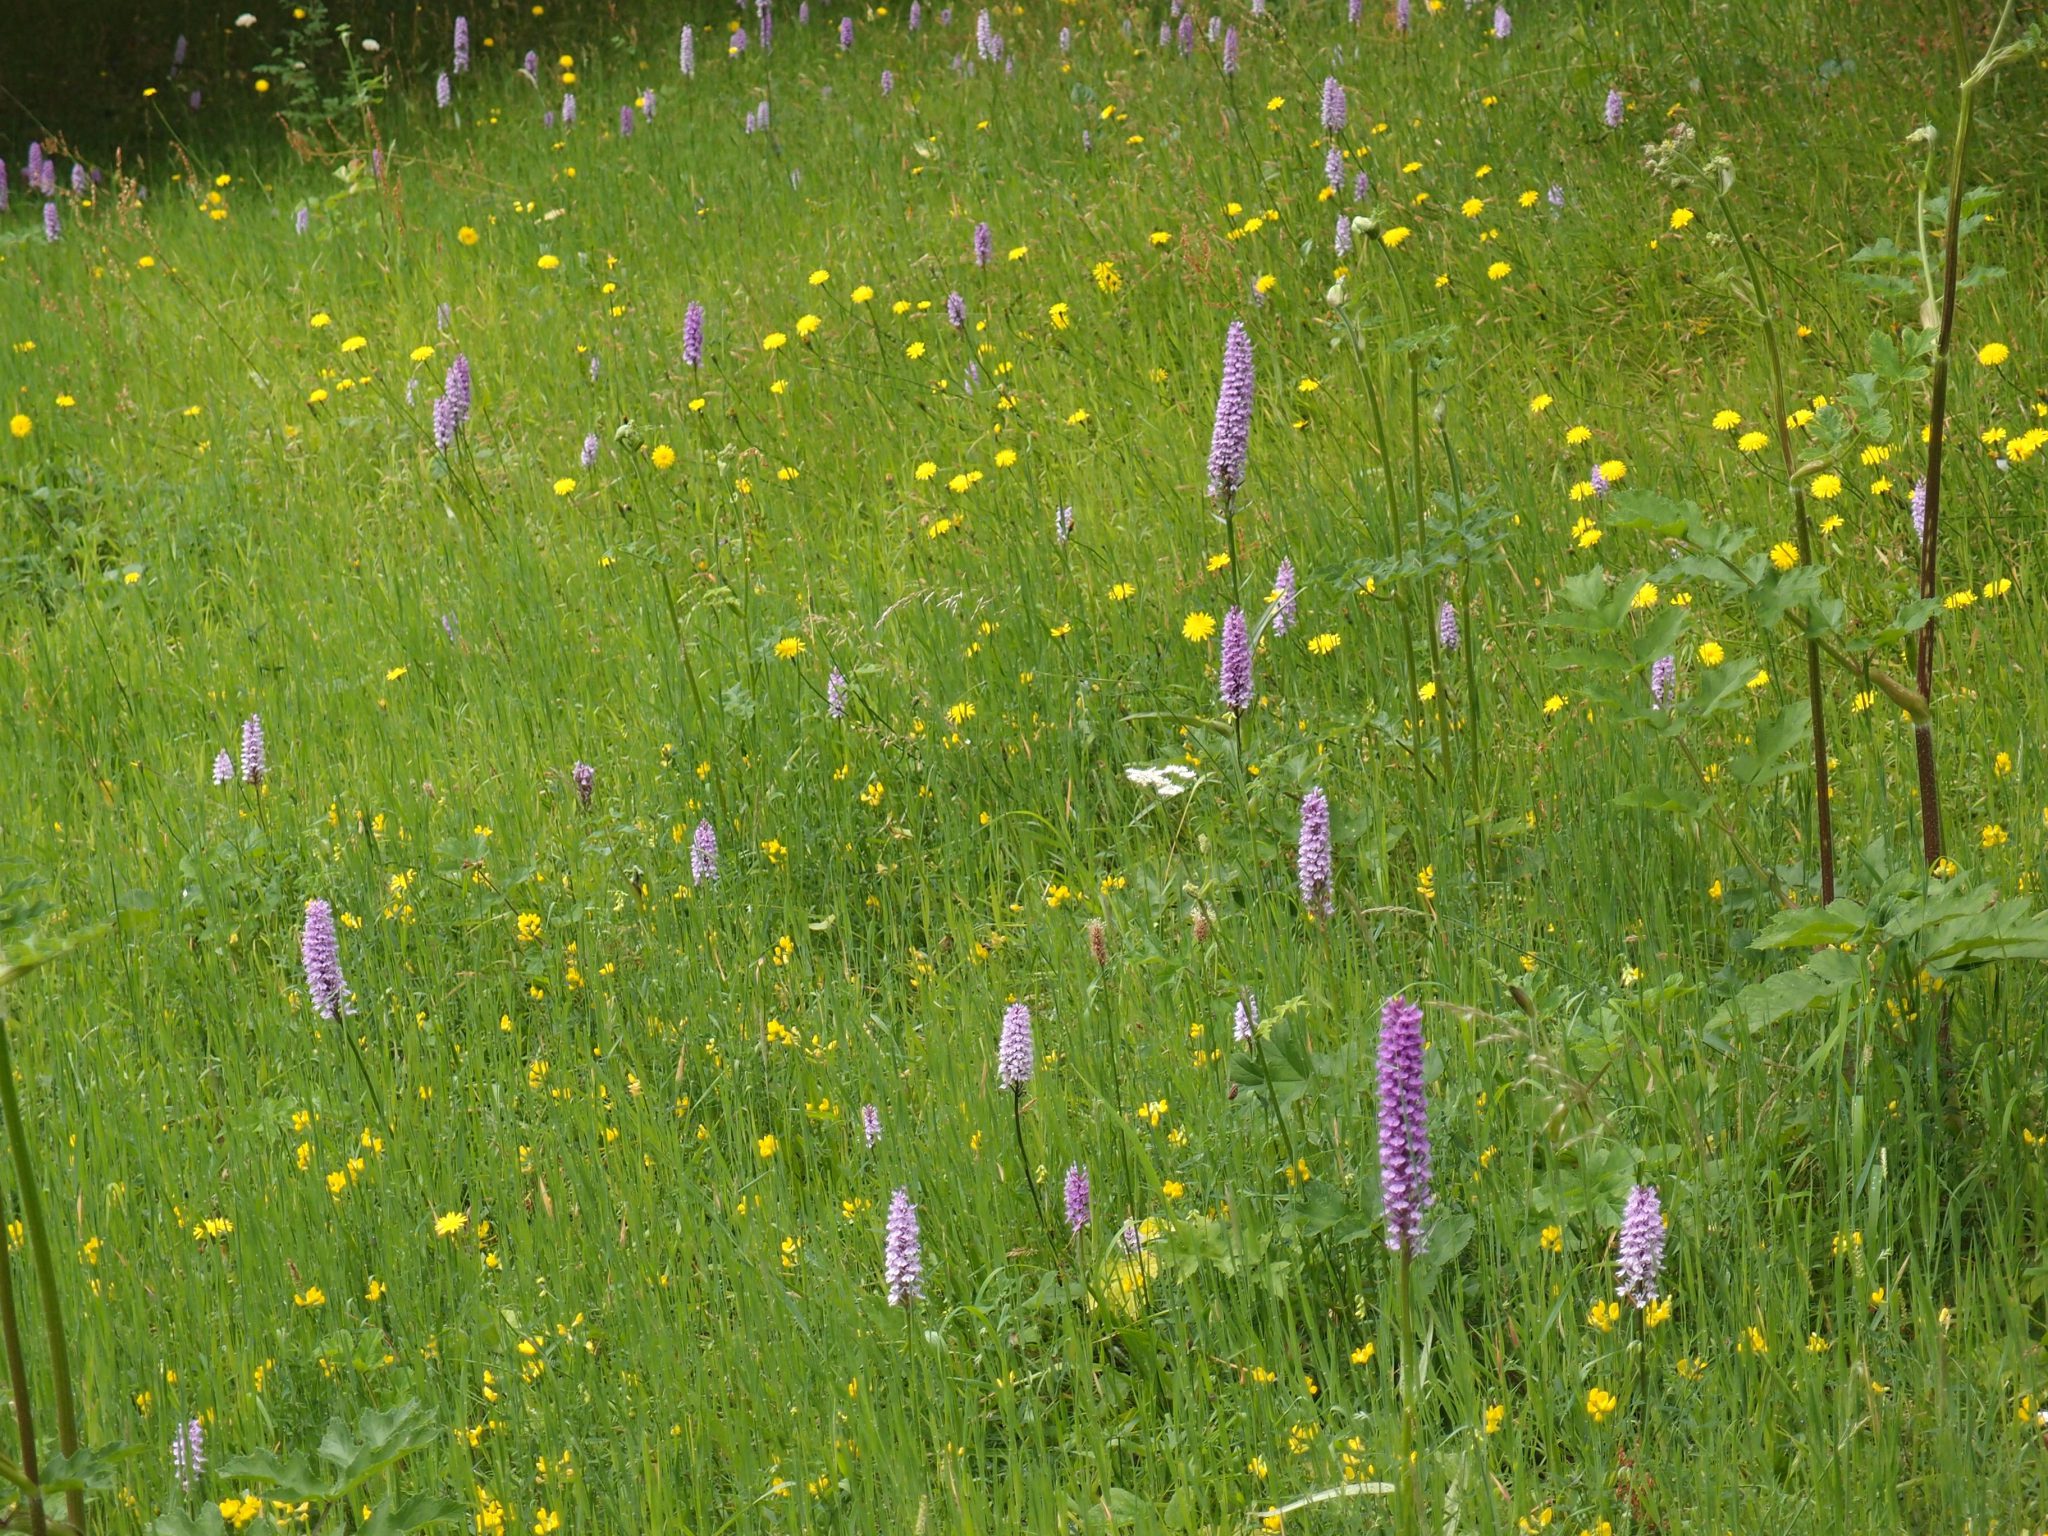 High Meadow, abloom with wild orchids, during my visit in High Summer.